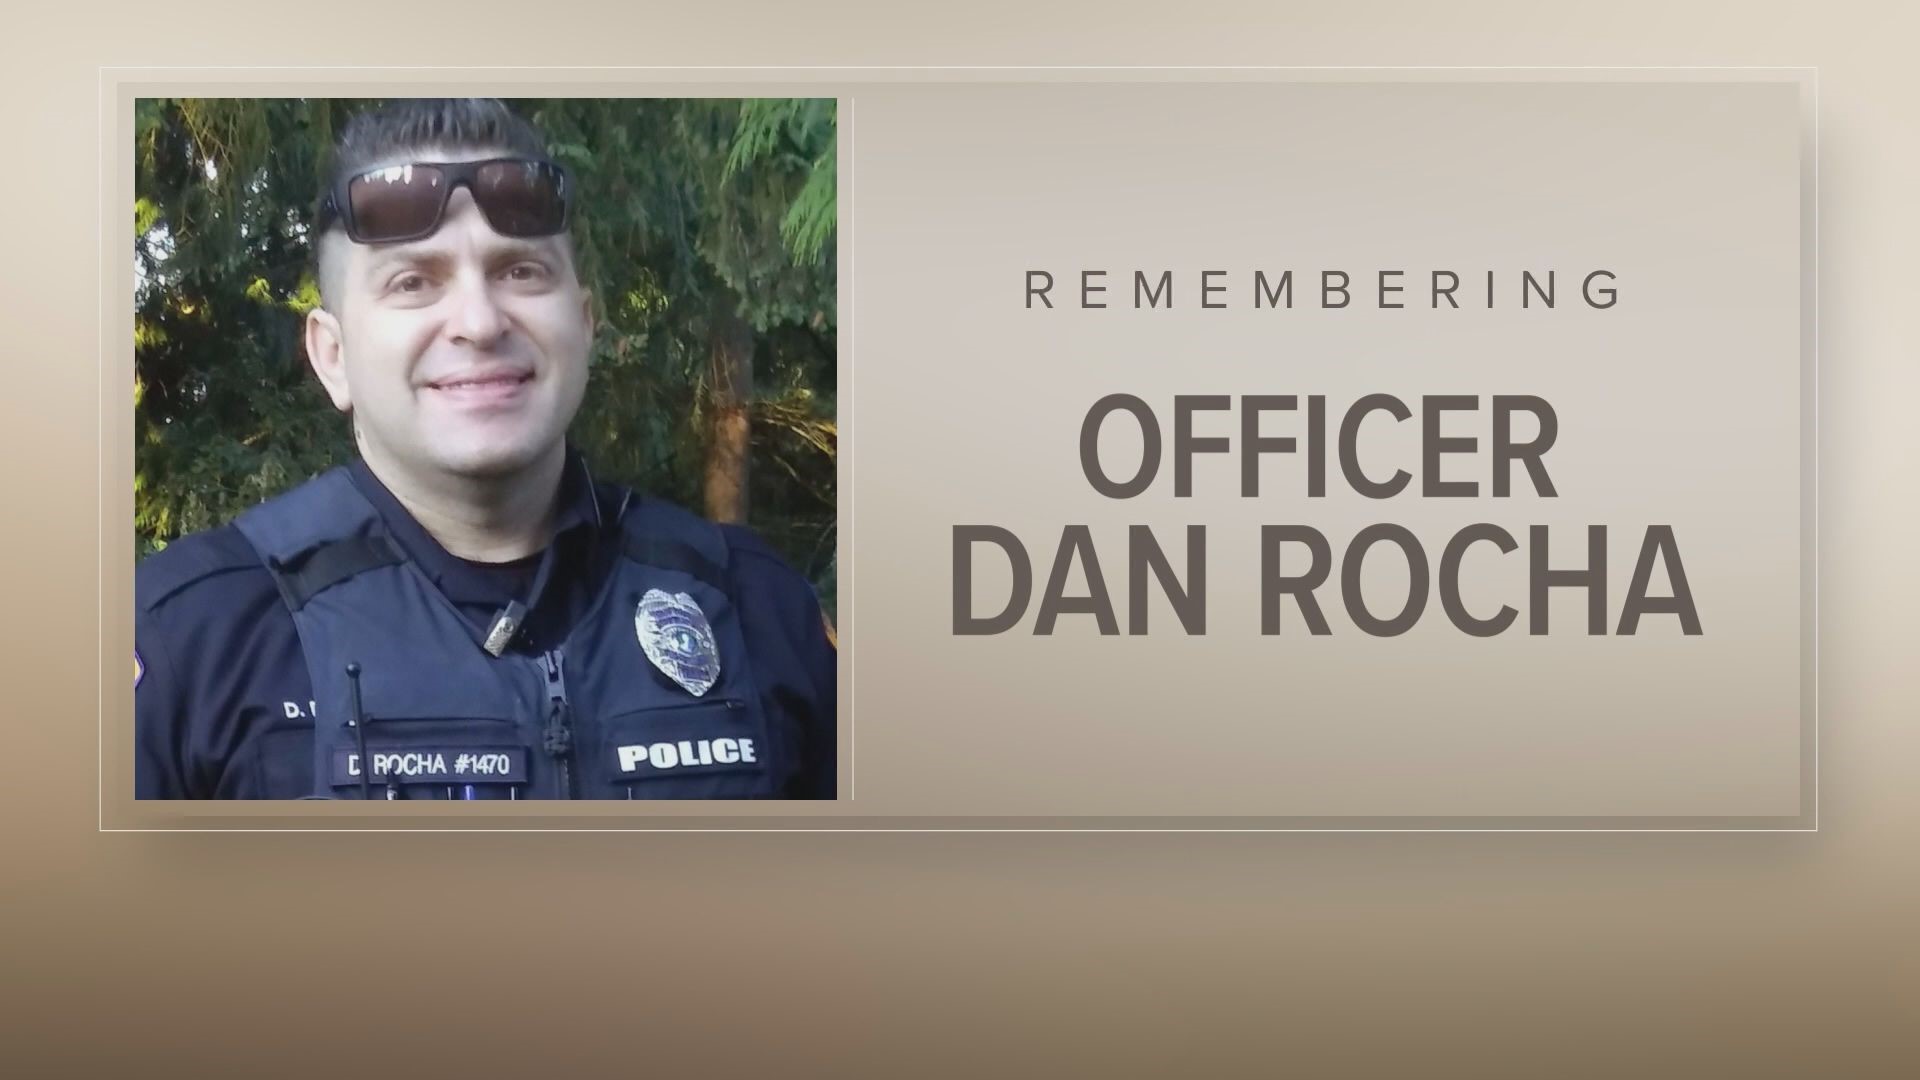 The Everett Police Public Information Officer shares his memories of Dan Rocha ahead of the fallen officer's celebration of life.